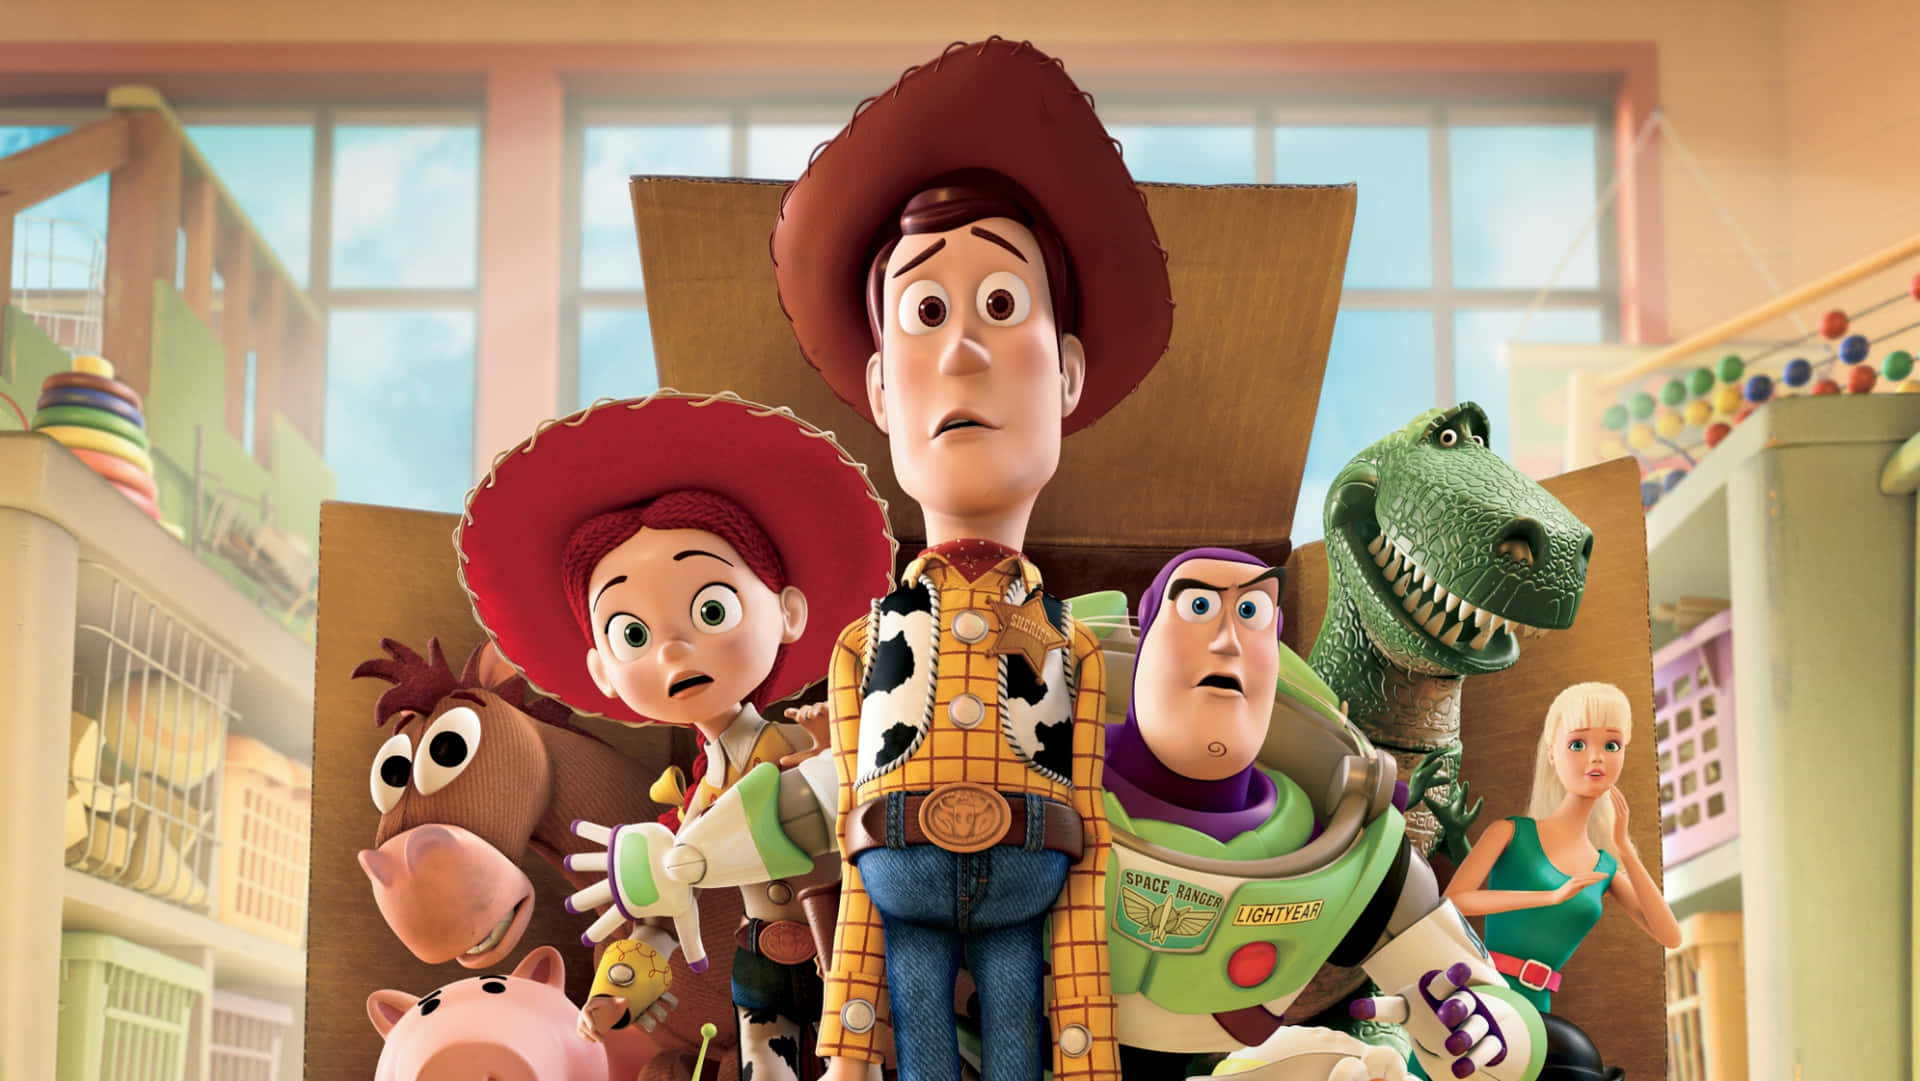 Sheriff Woody and Forky embark on a new adventure in Toy Story 4.